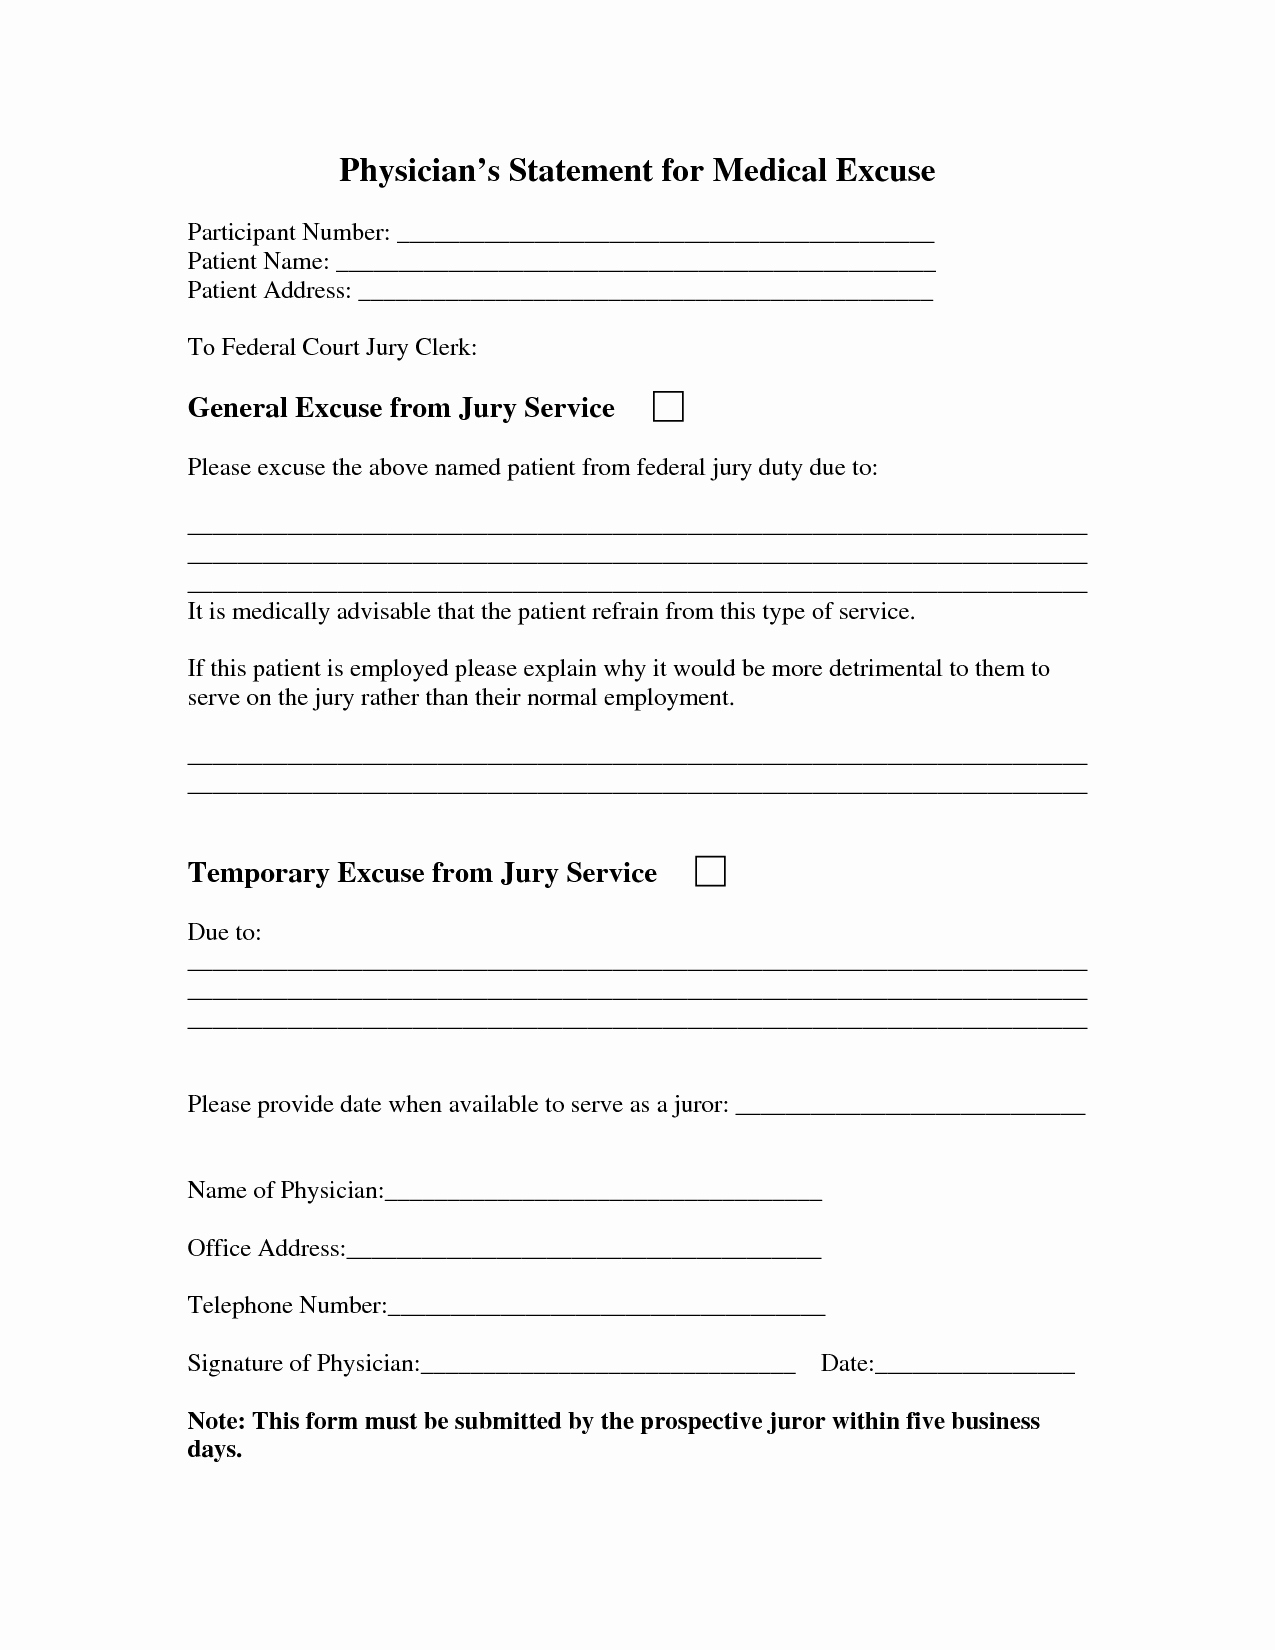 Medical Excuse form Inspirational Best S Of Physician Statement Medical Necessity